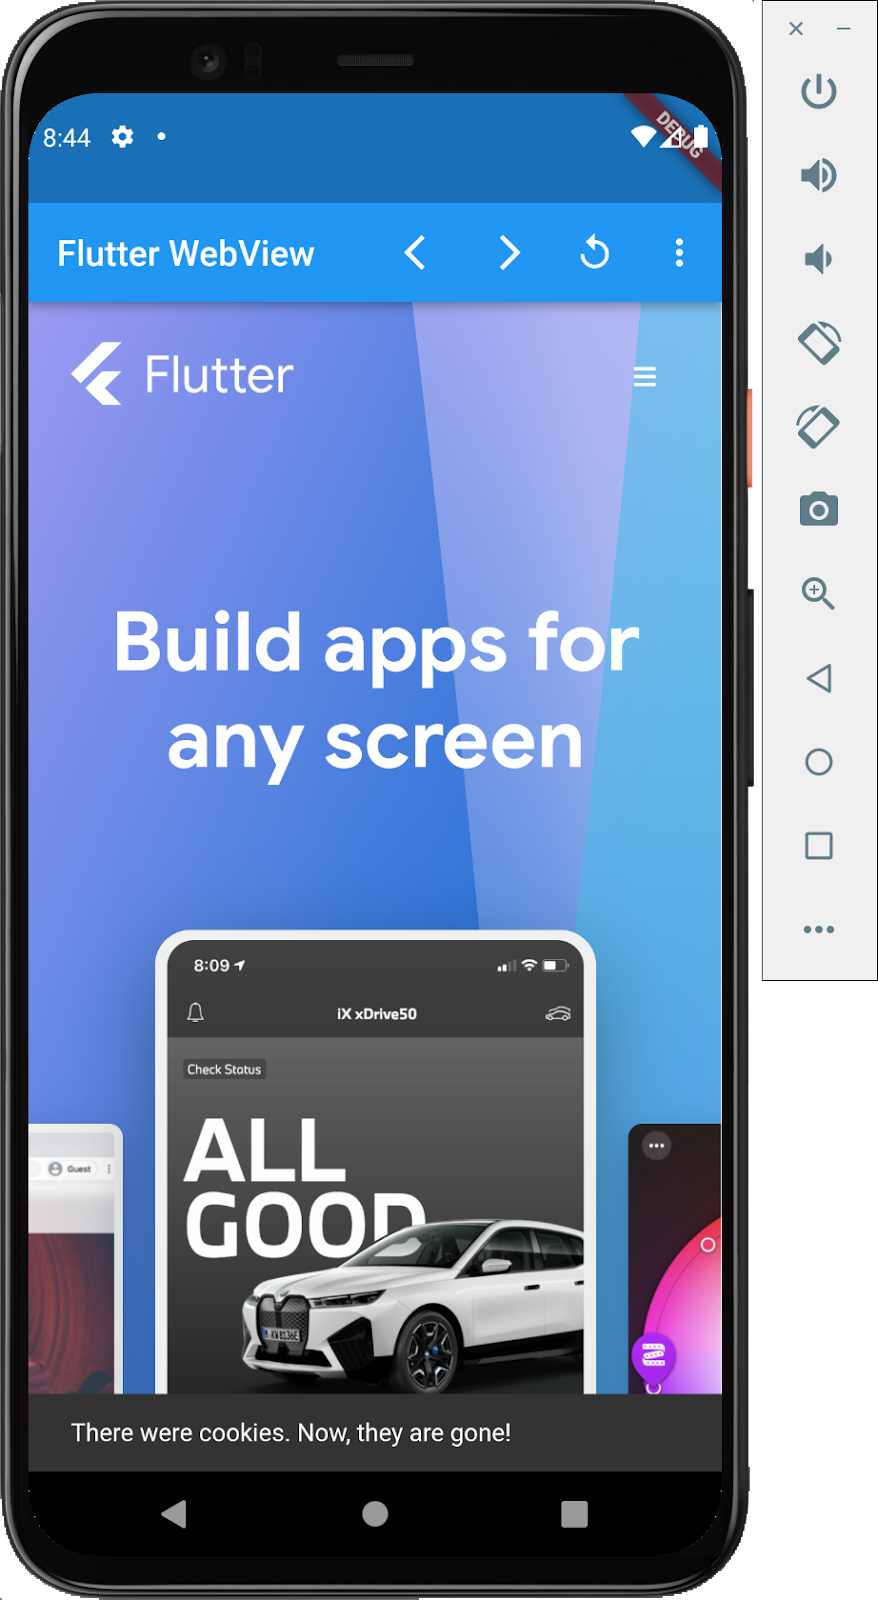 A screen shot of an Android emulator running a Flutter app with an embedded webview showing the Flutter.dev homepage with a toast popup that reads 'There were cookies. Now they are gone!'